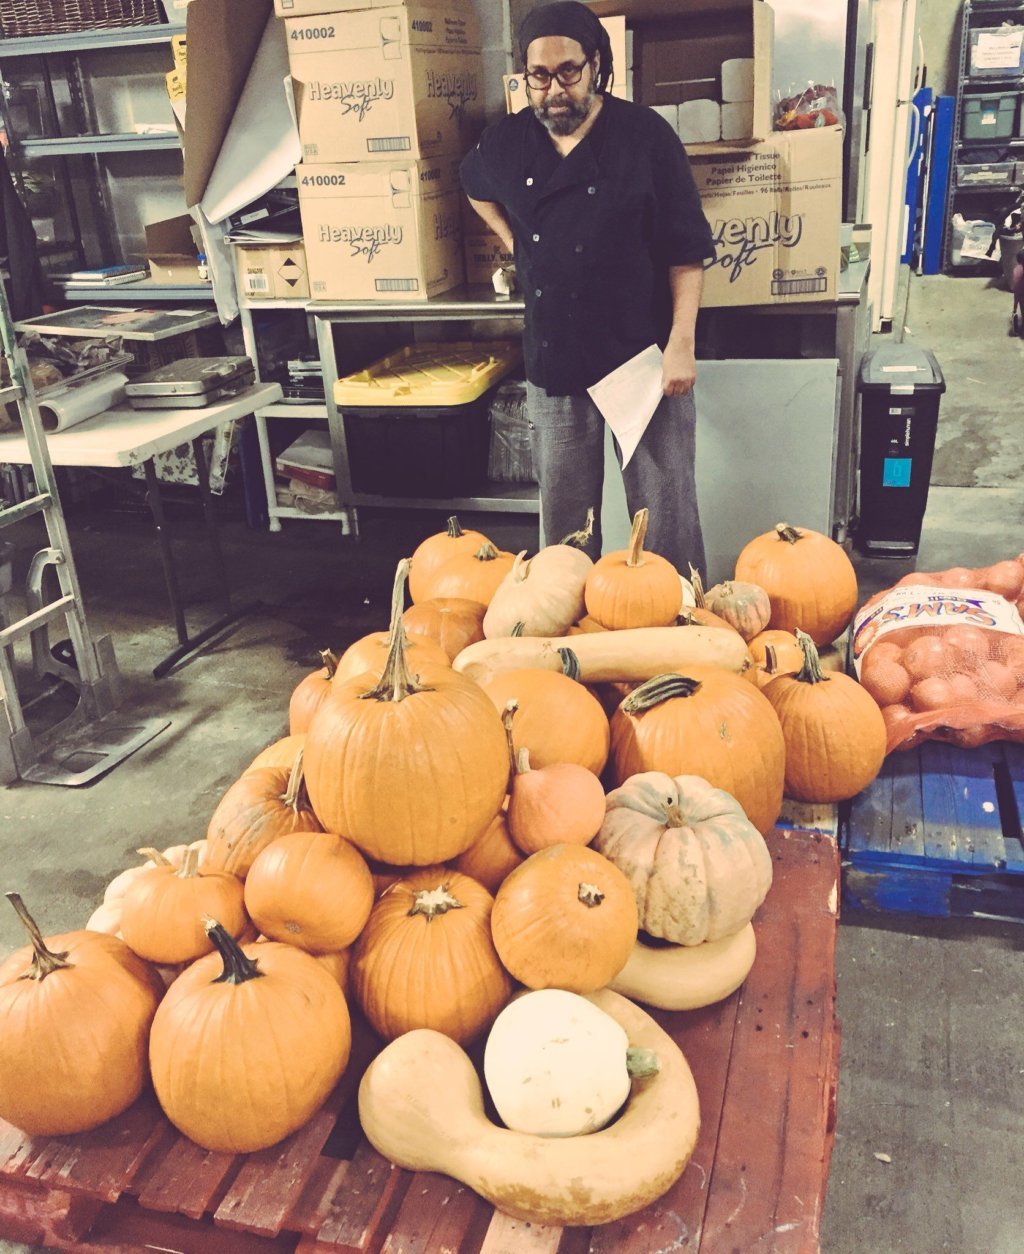 Pumpkins donated to Miriam's Kitchen as part of the effort by Pumpkins for the People 2017. (Courtesy Agricity)